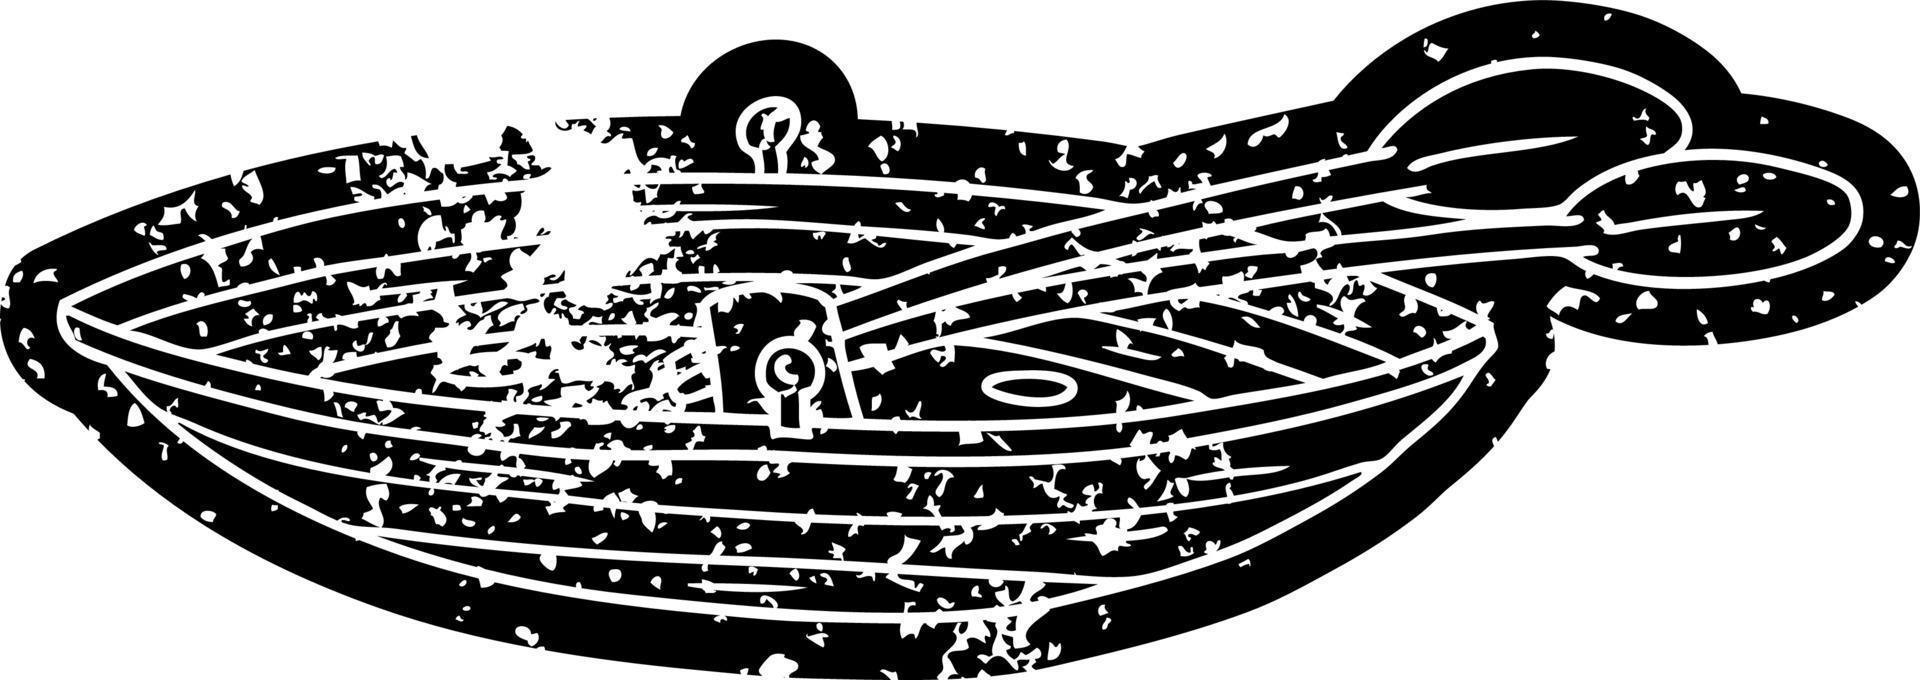 grunge icon drawing of a wooden boat vector